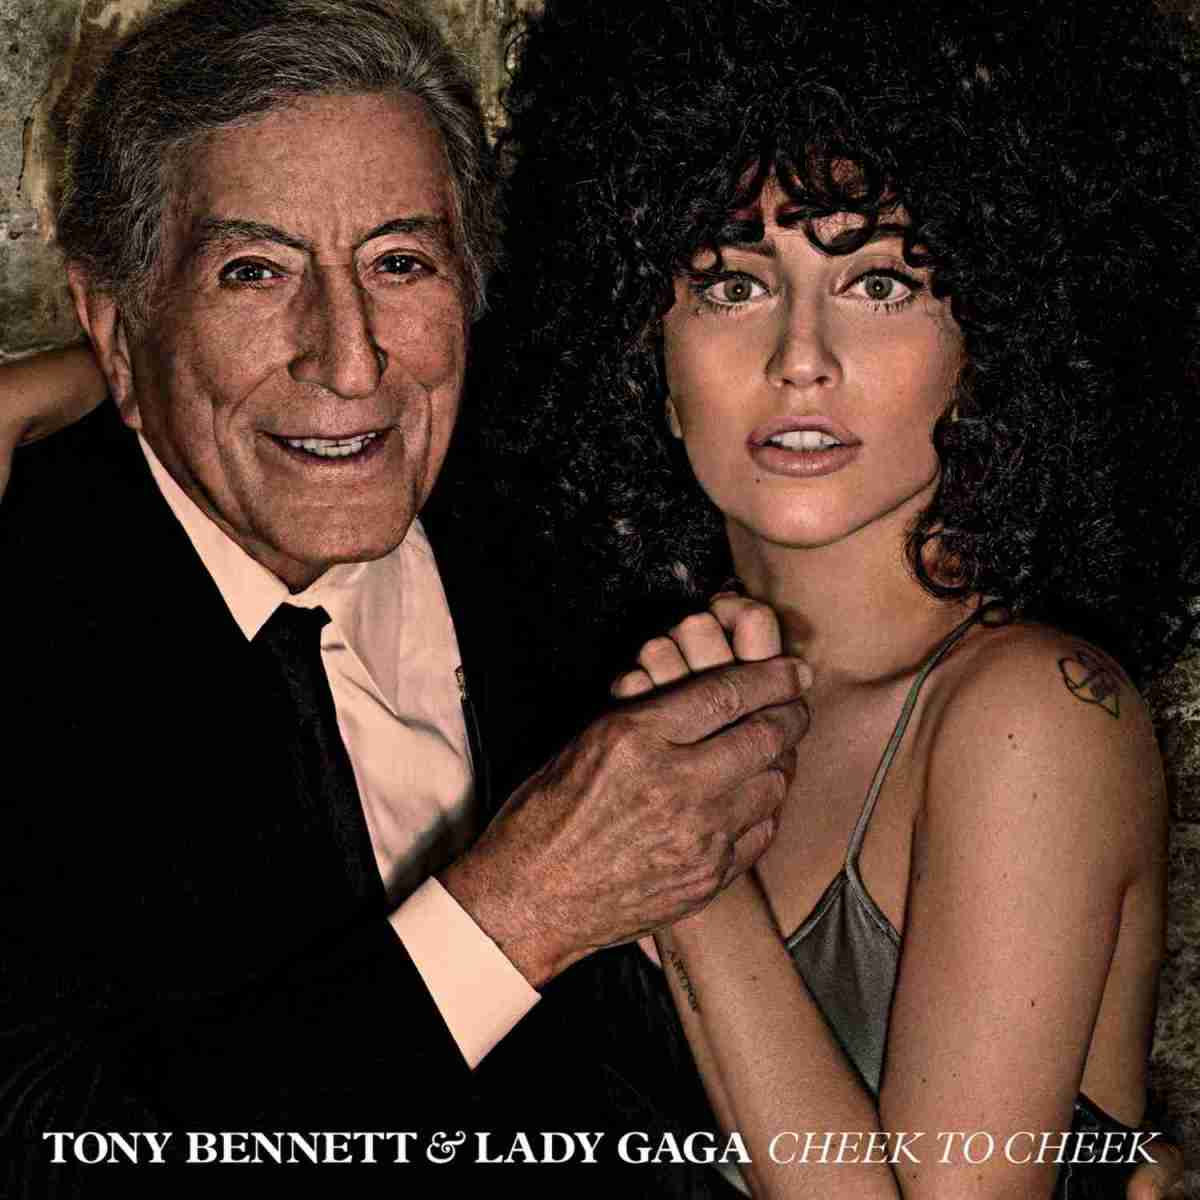 Download Tony Bennett and Lady Gaga - Cheek to Cheek (Deluxe Edition) (Columbia Records) im Test, Bild 1